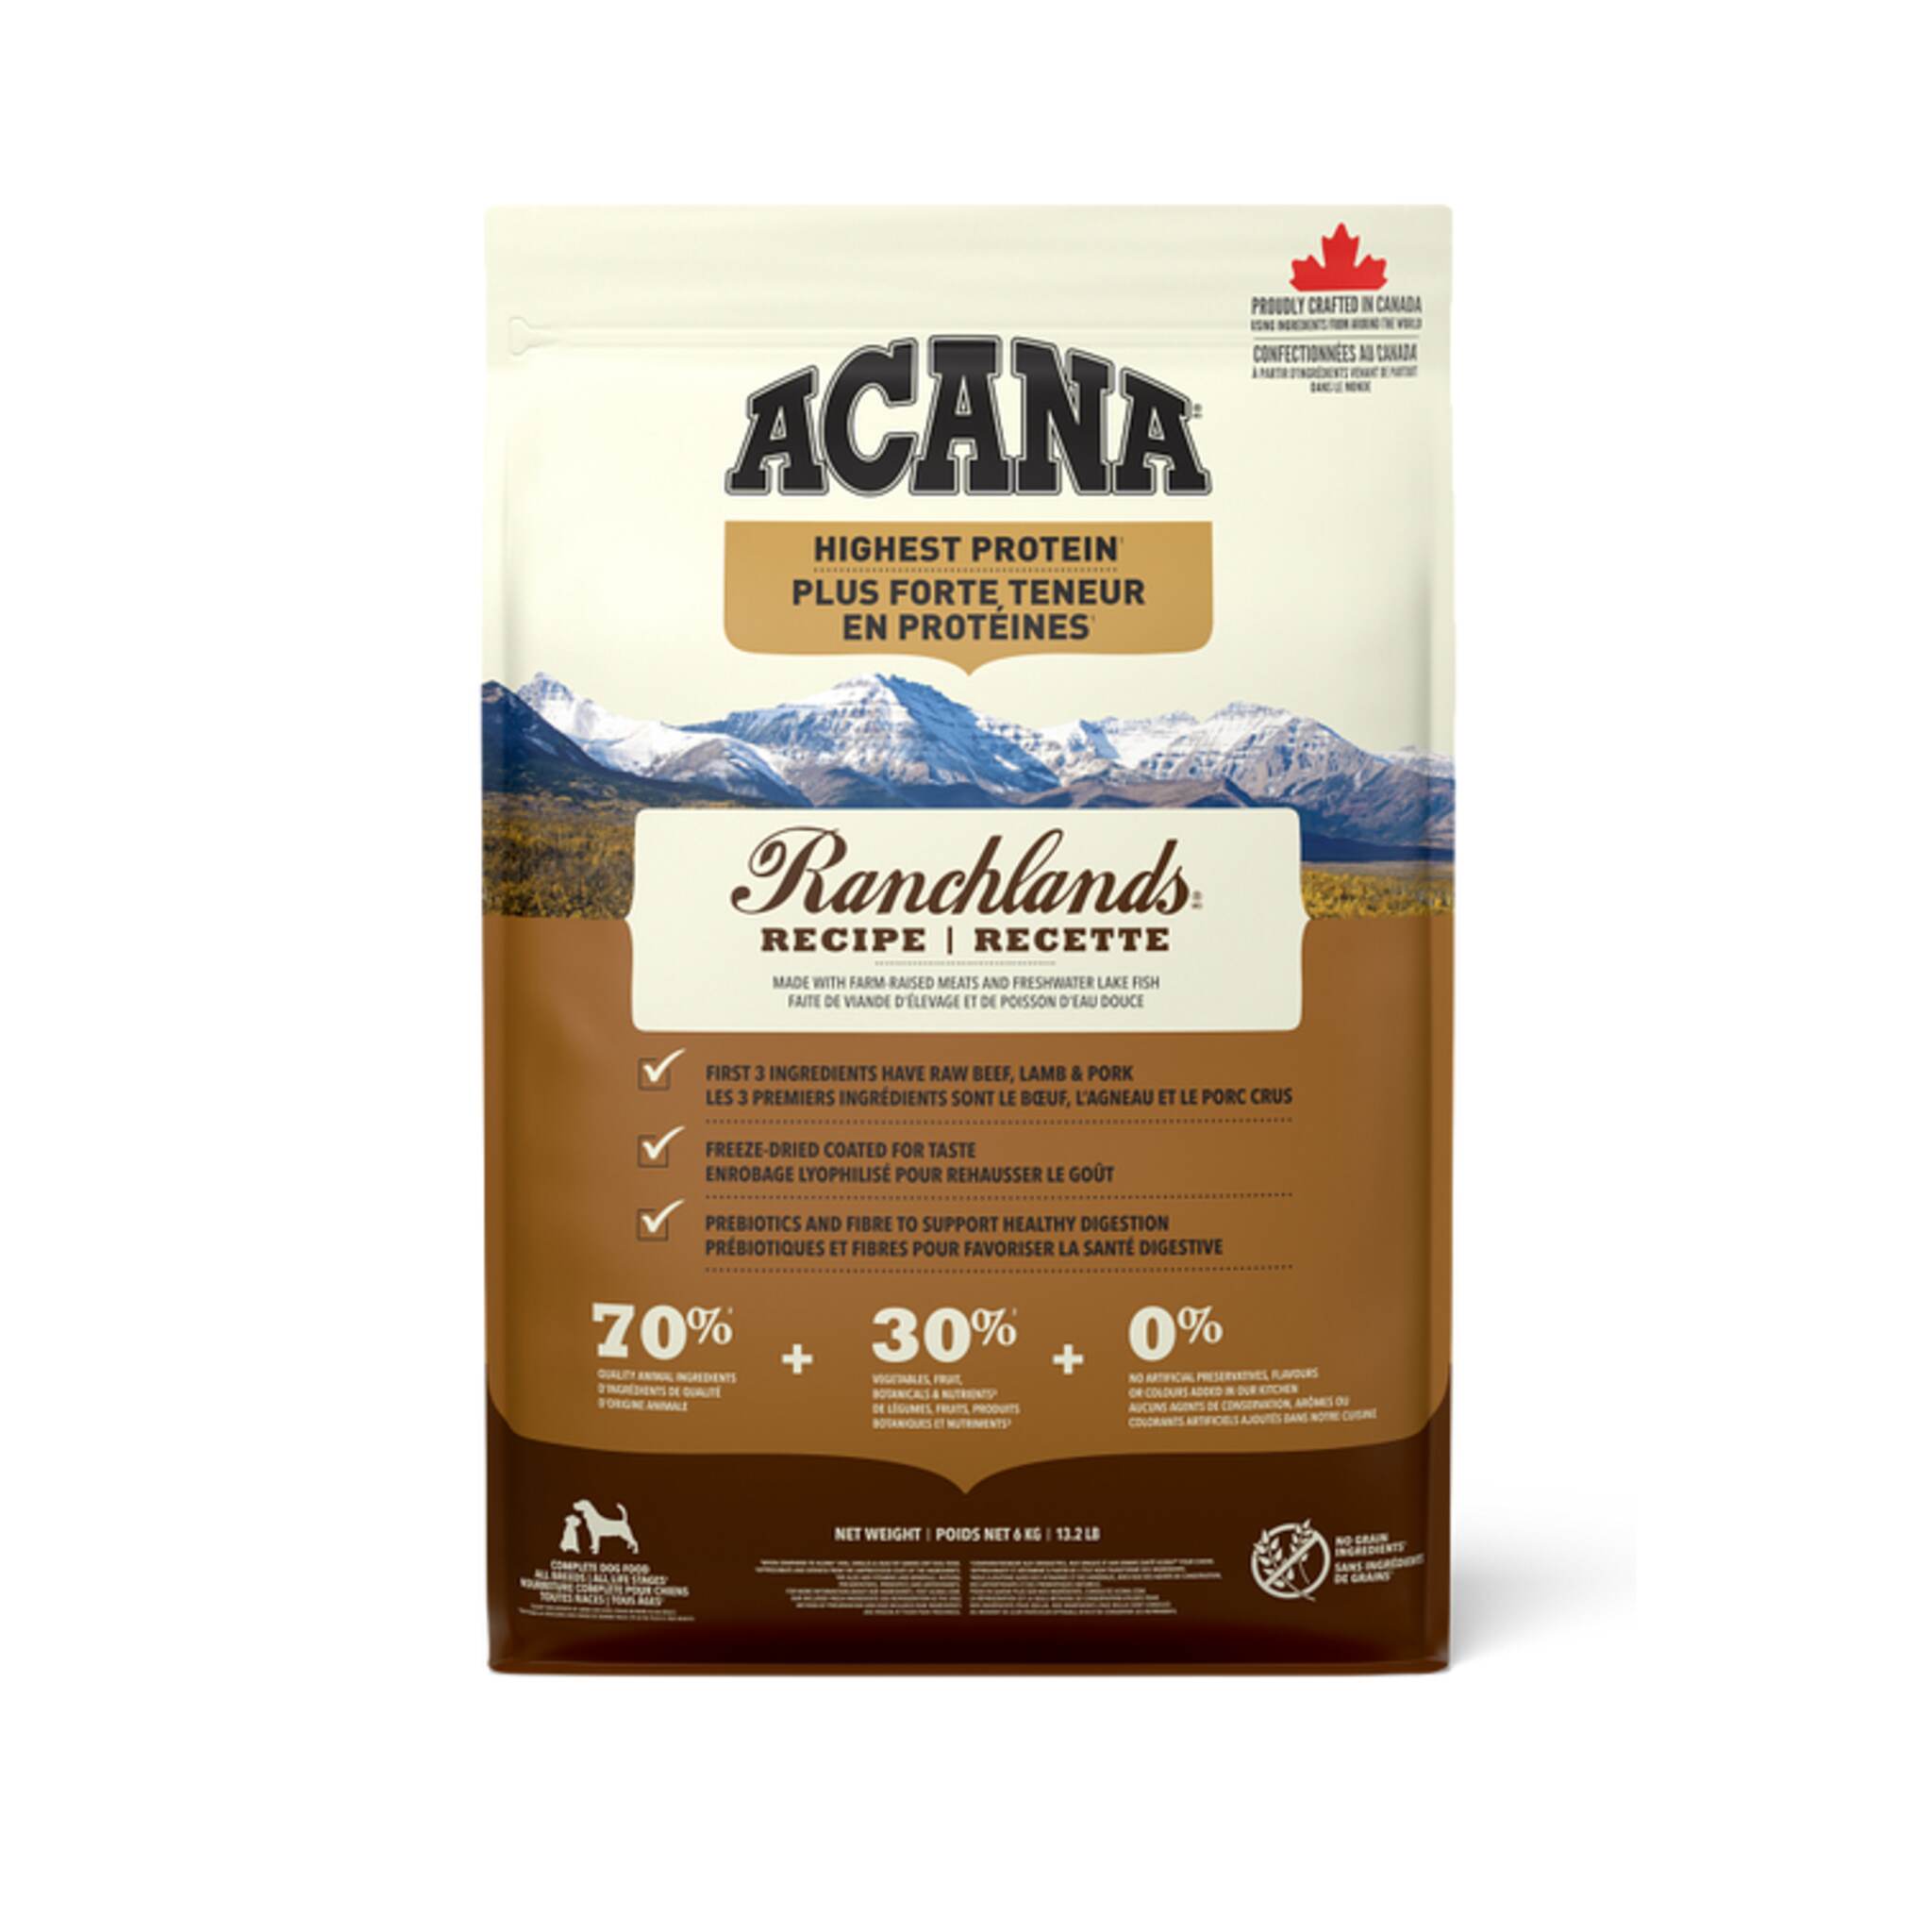 A bag of Acana Highest Protein dog food, Ranchlands recipe, 25 lb.